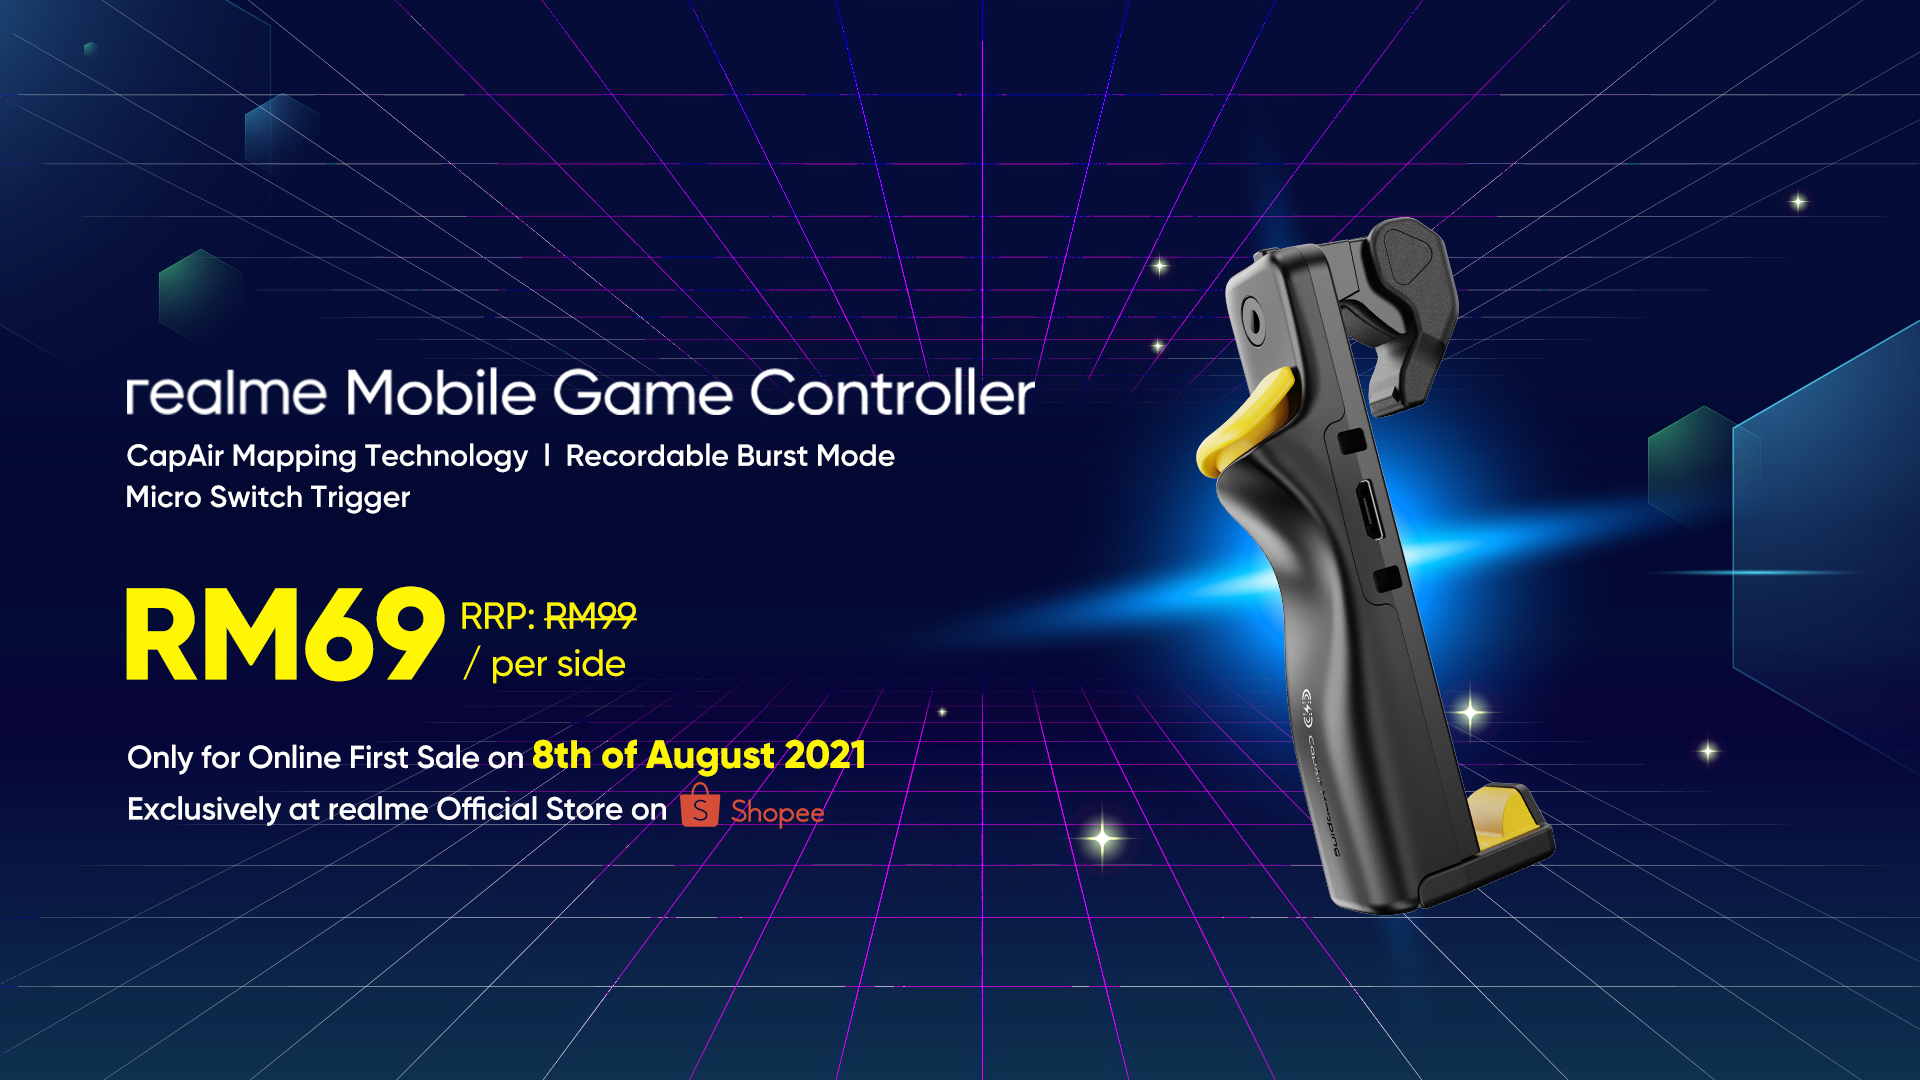 Visual realme Mobile Game Controller First Sale on Shopee